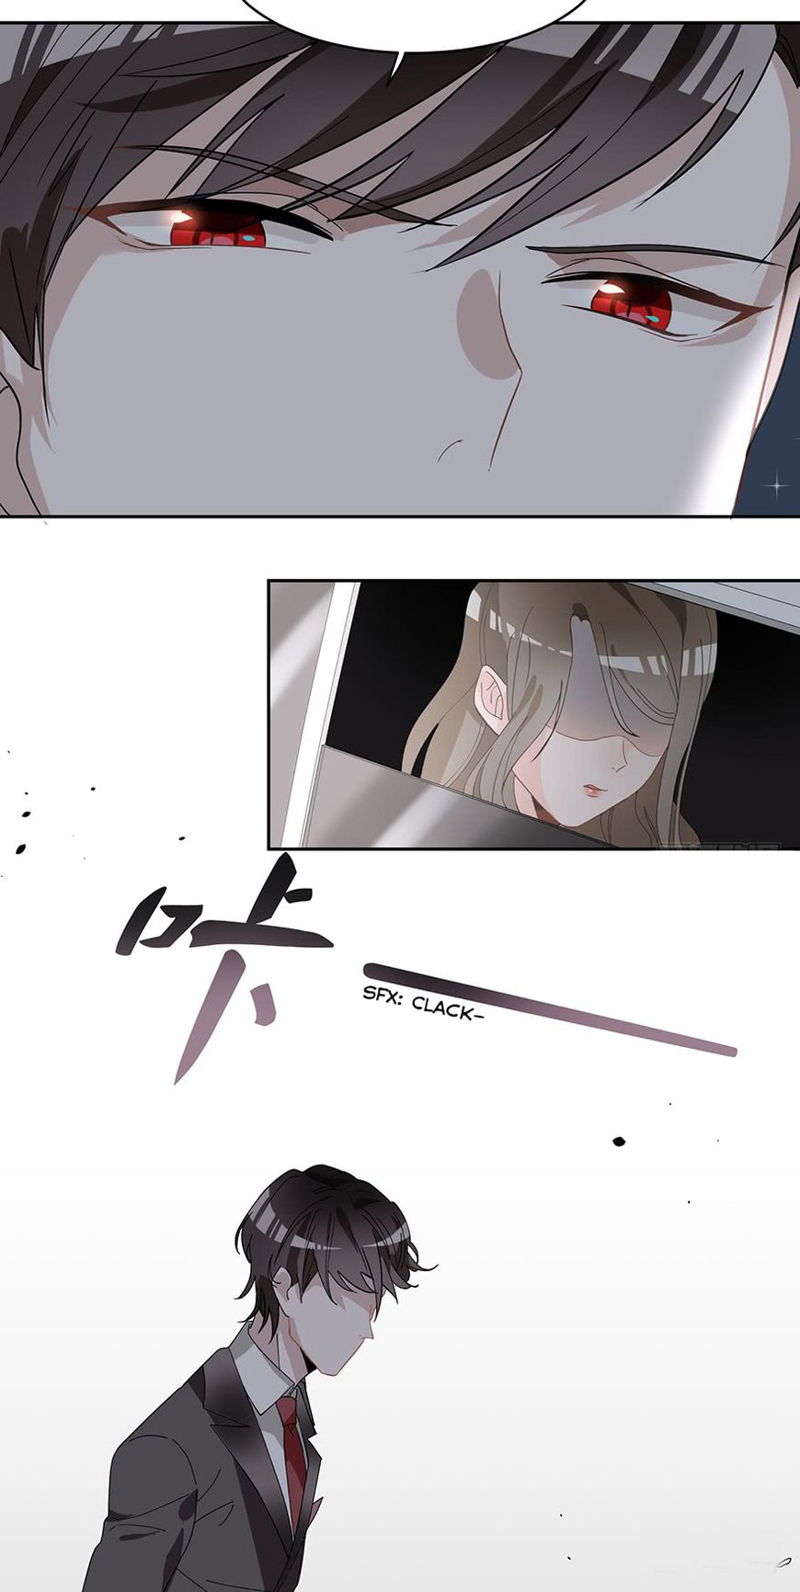 Before Love Kills me Chapter 6 - Ch. 2 page 26